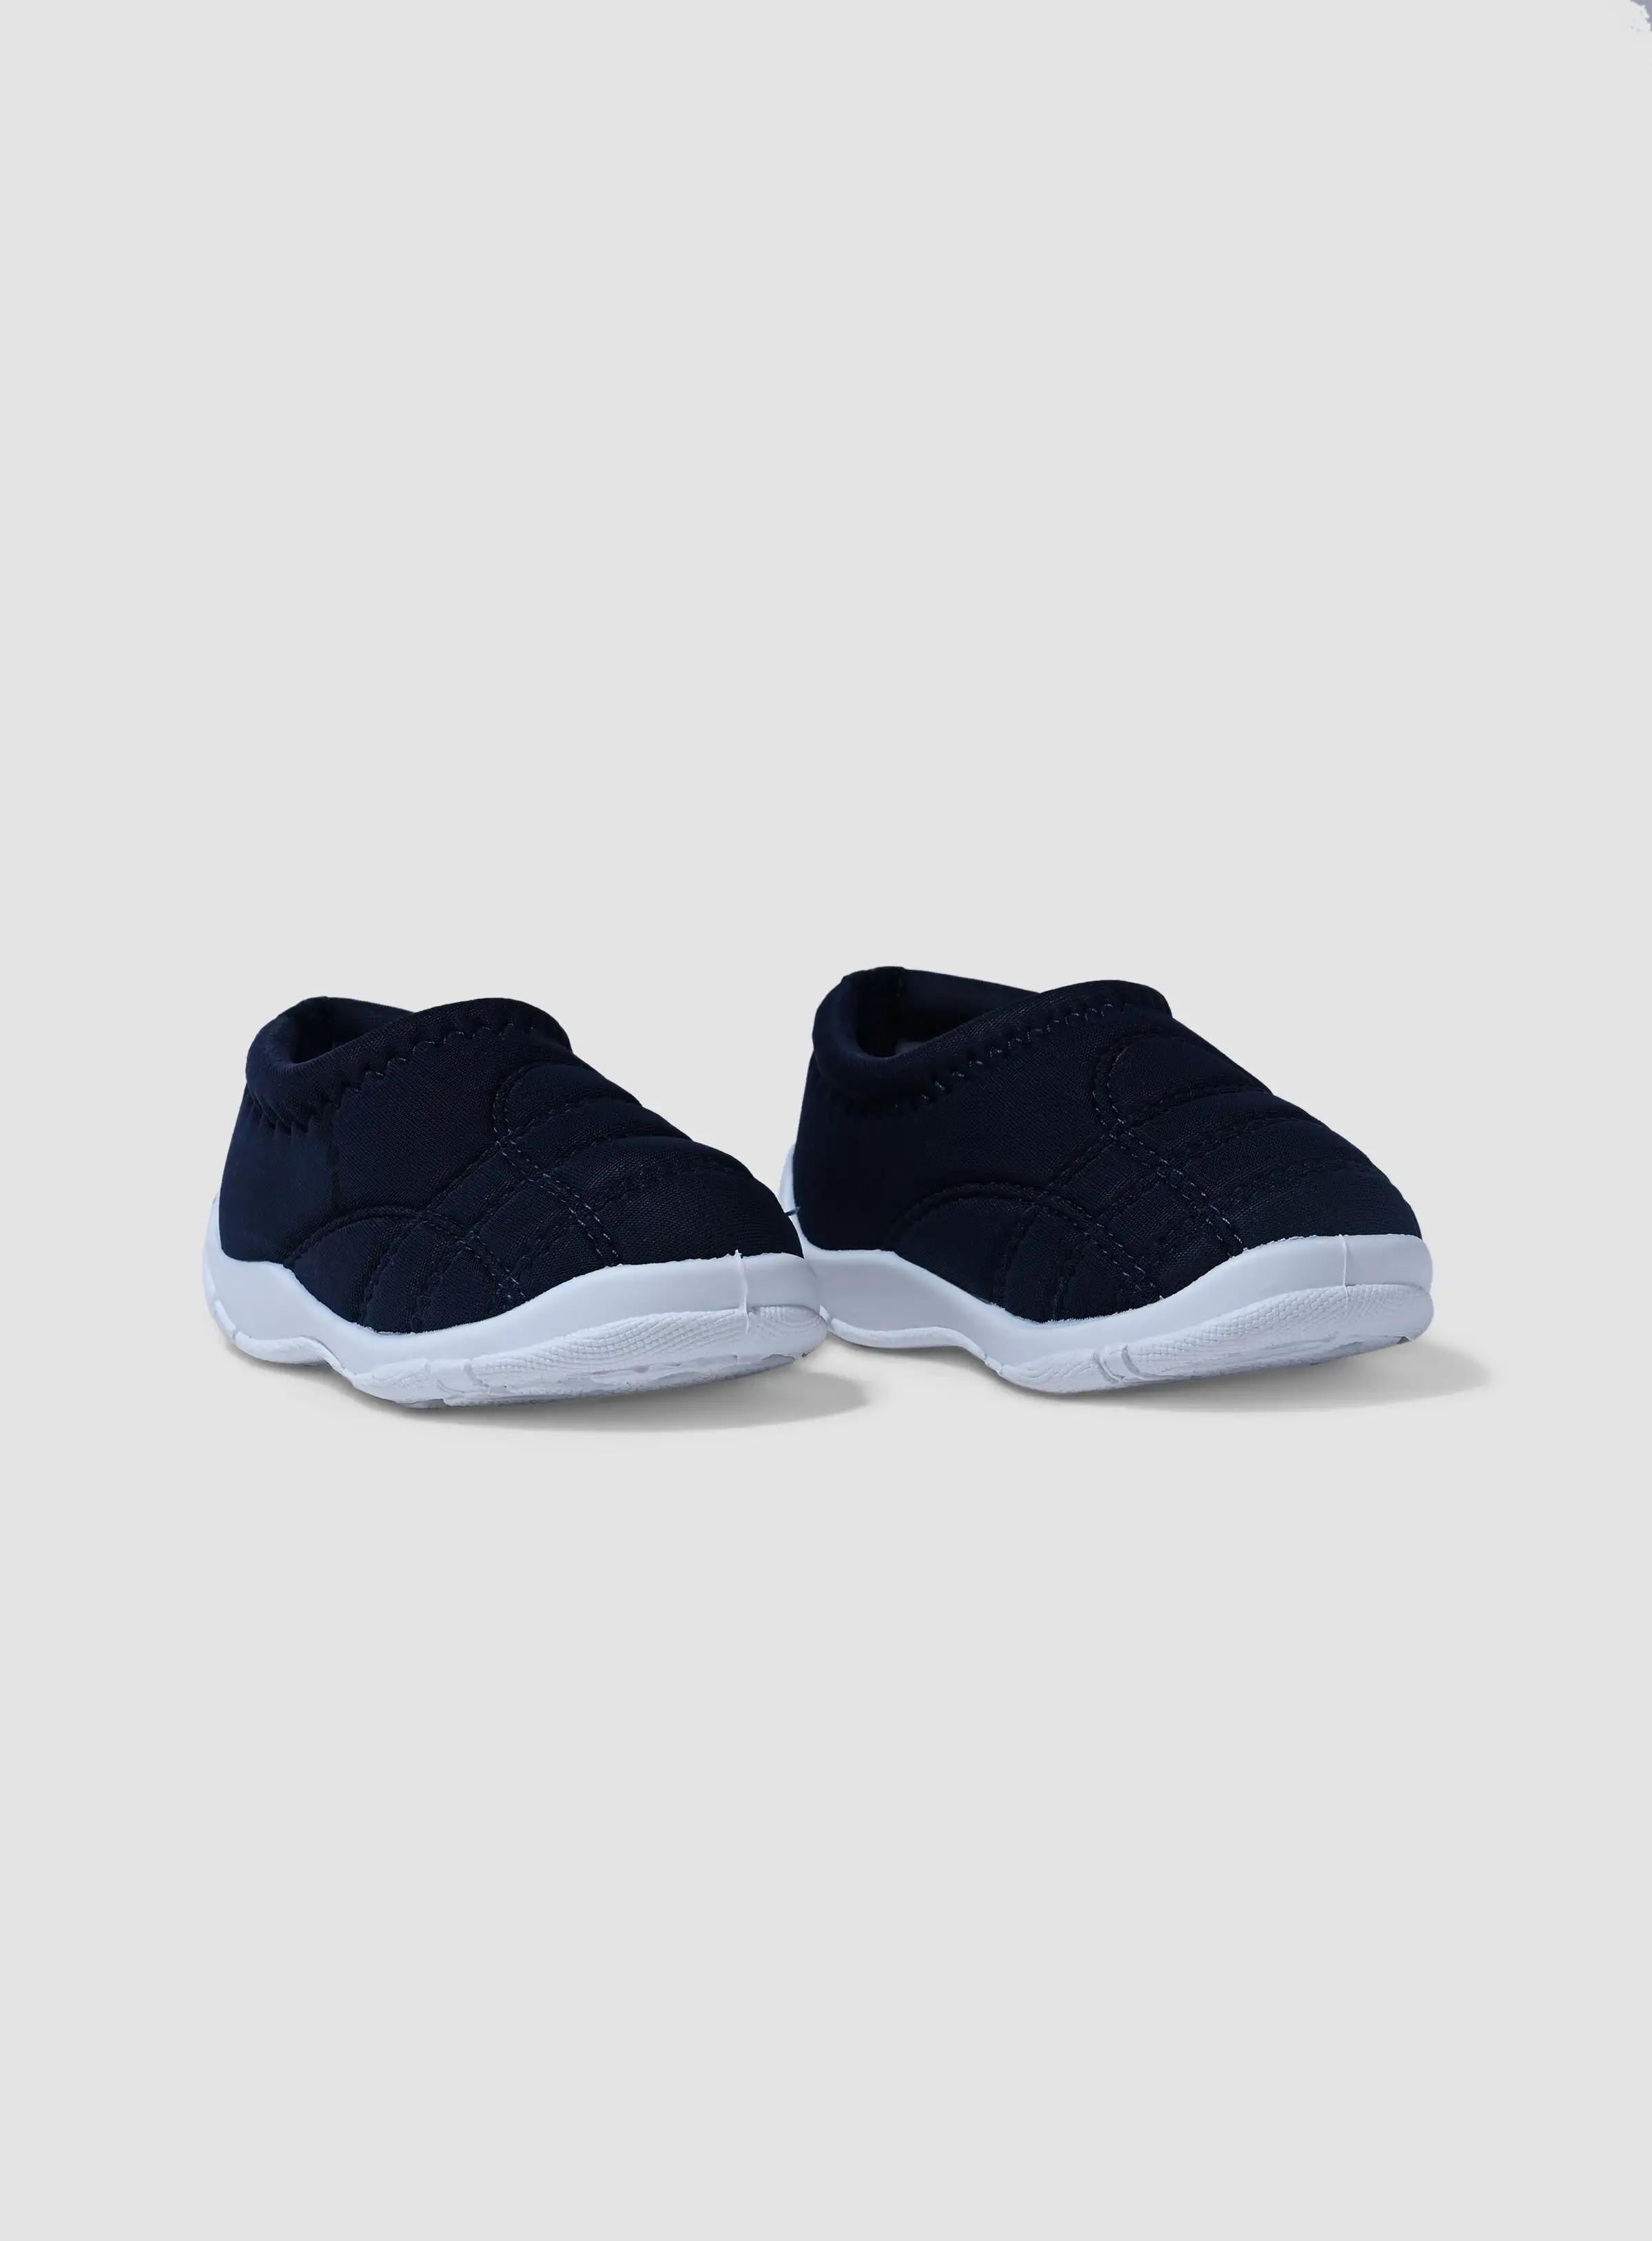 NEON Casual Slip-On Comfort Shoes Navy Blue